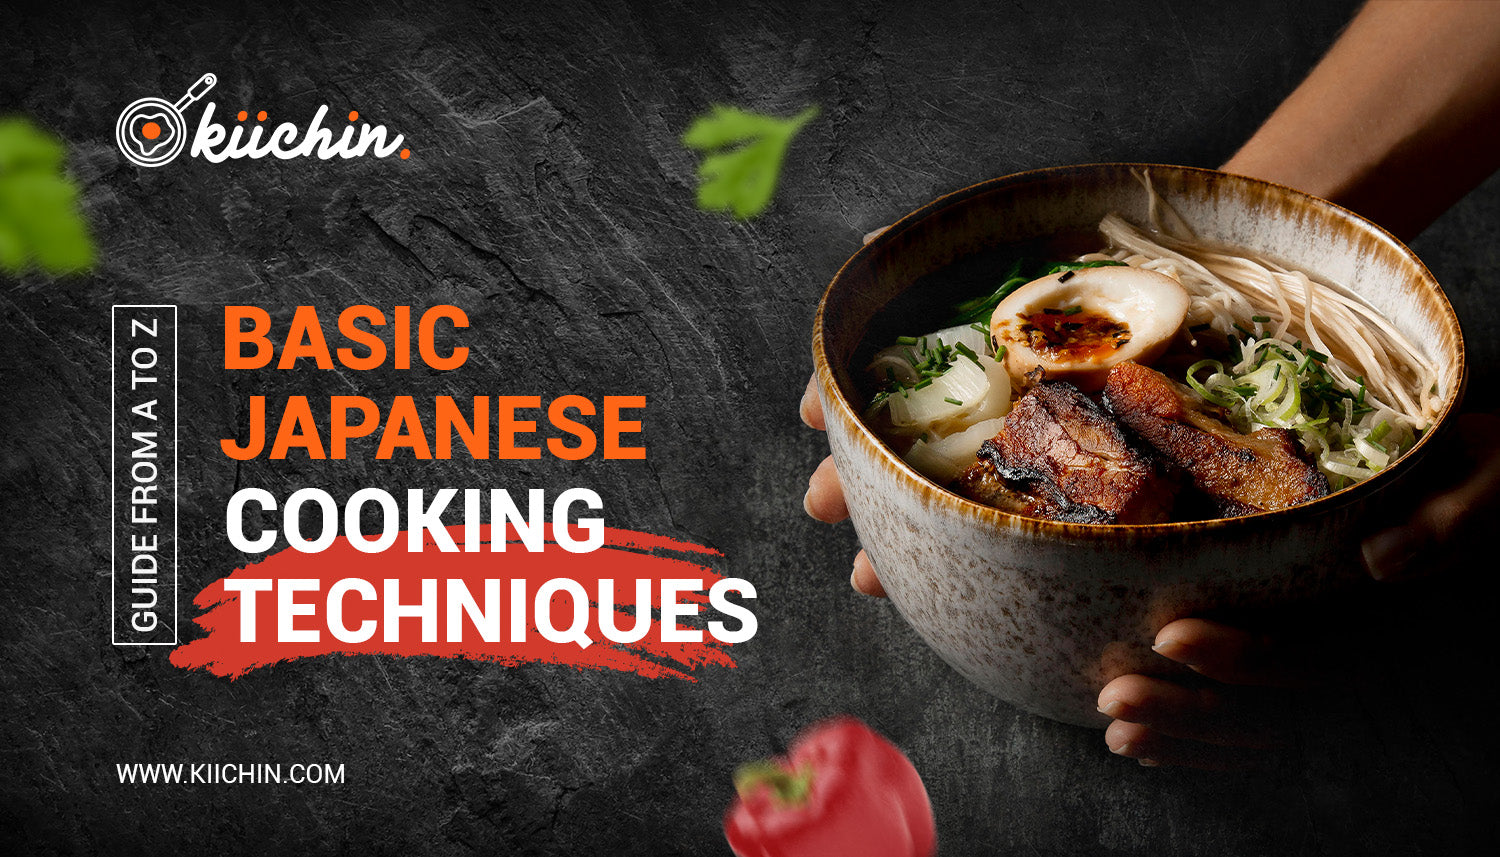 The Ultimate Guide: 4 Main Styles of Japanese Cooking Techniques